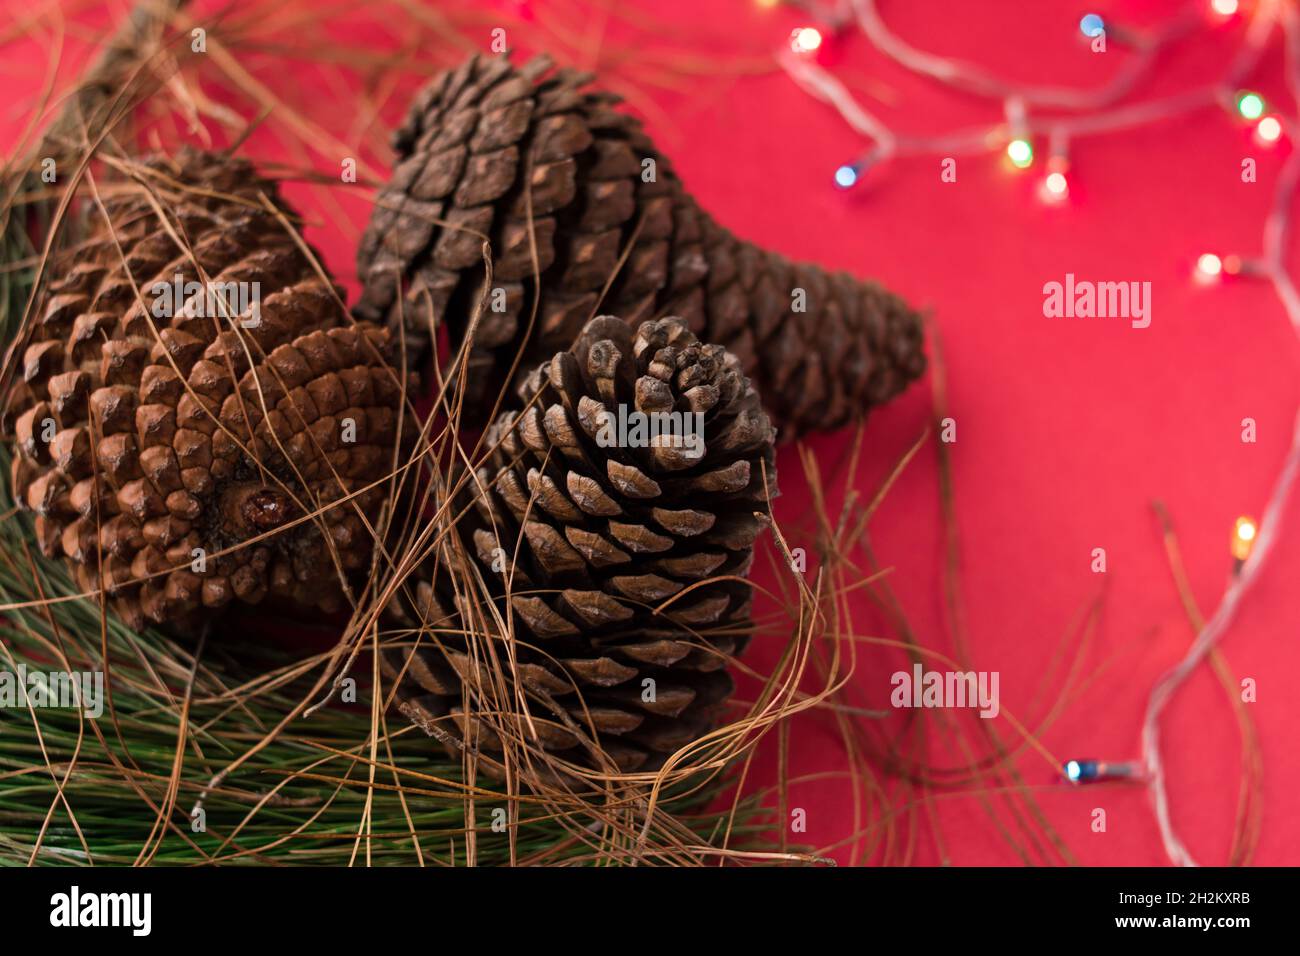 Some pine cones and pine branches on a bright red surface Stock Photo